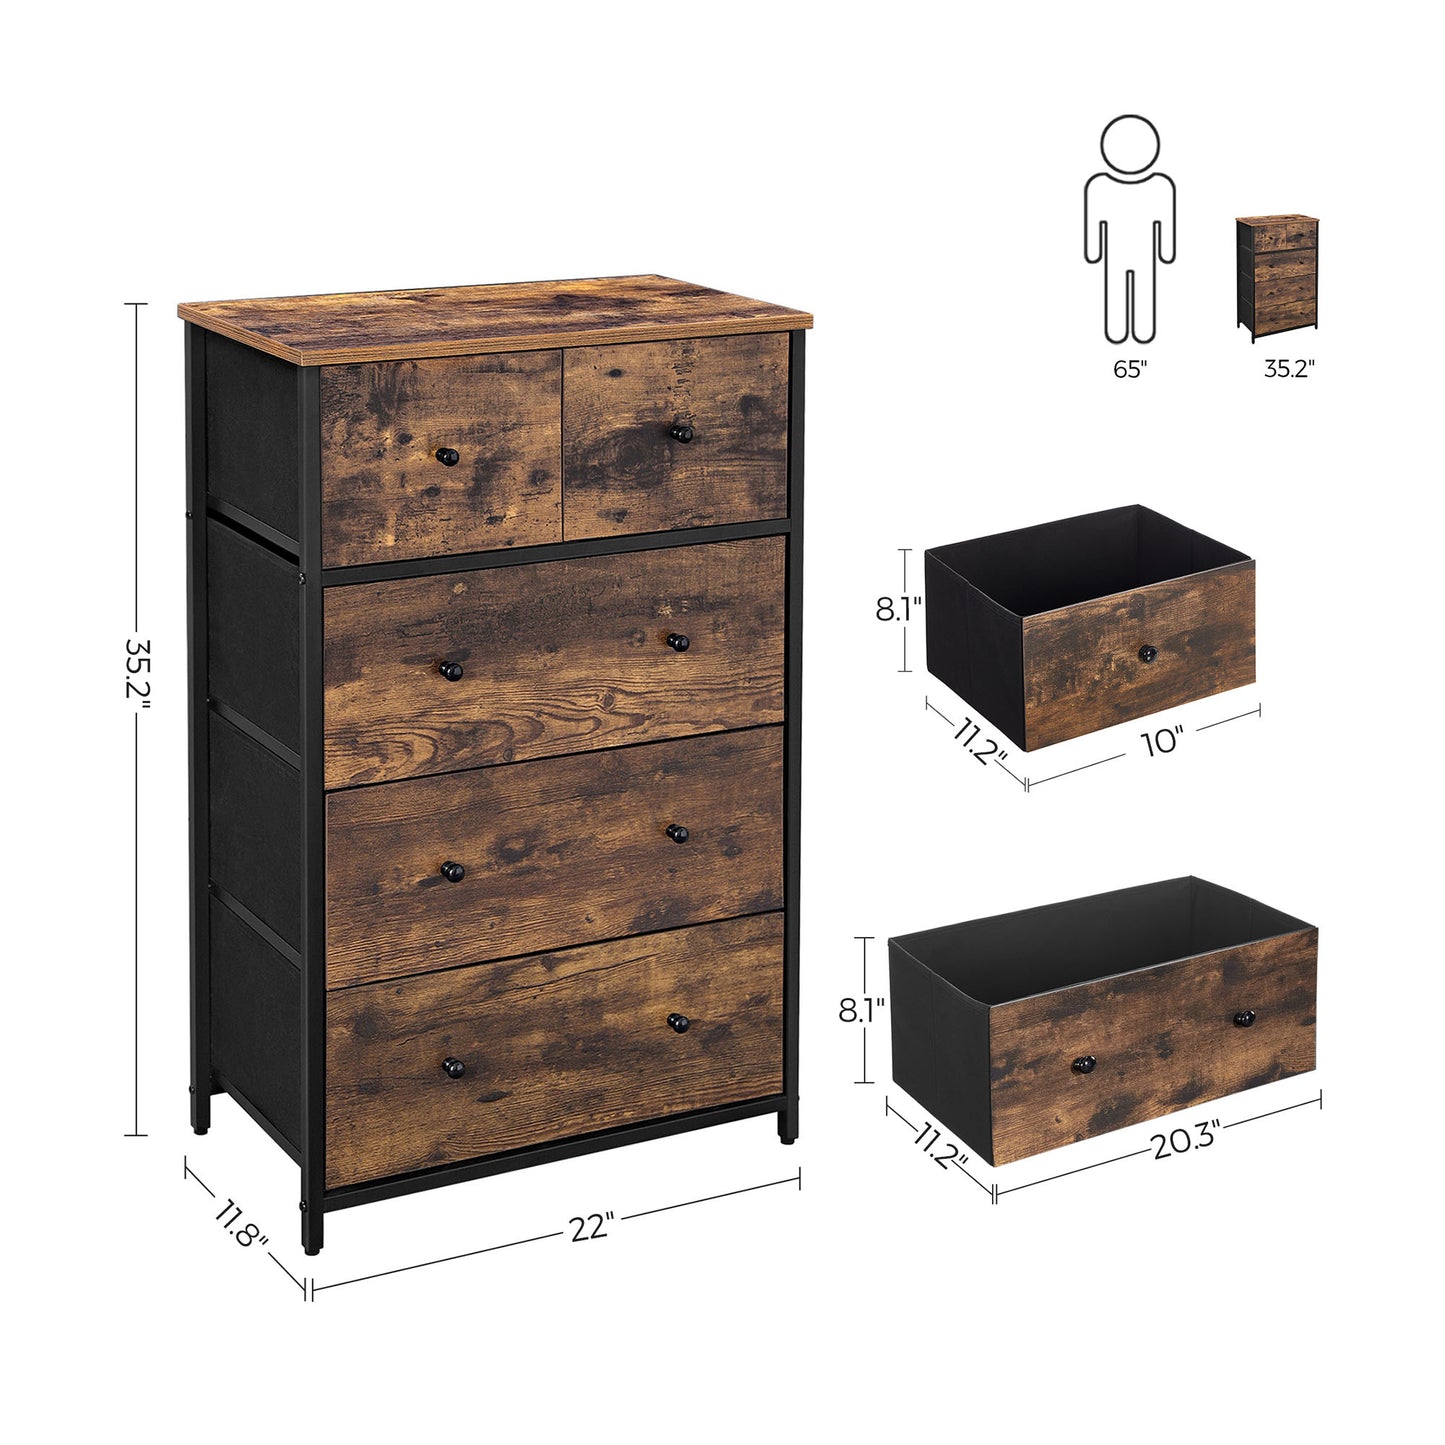 Chest of Drawers, Fabric 5-Drawer Storage Organiser Unit, Wooden Front and Top, Industrial Style Dresser Unit, SONGMICS, 9